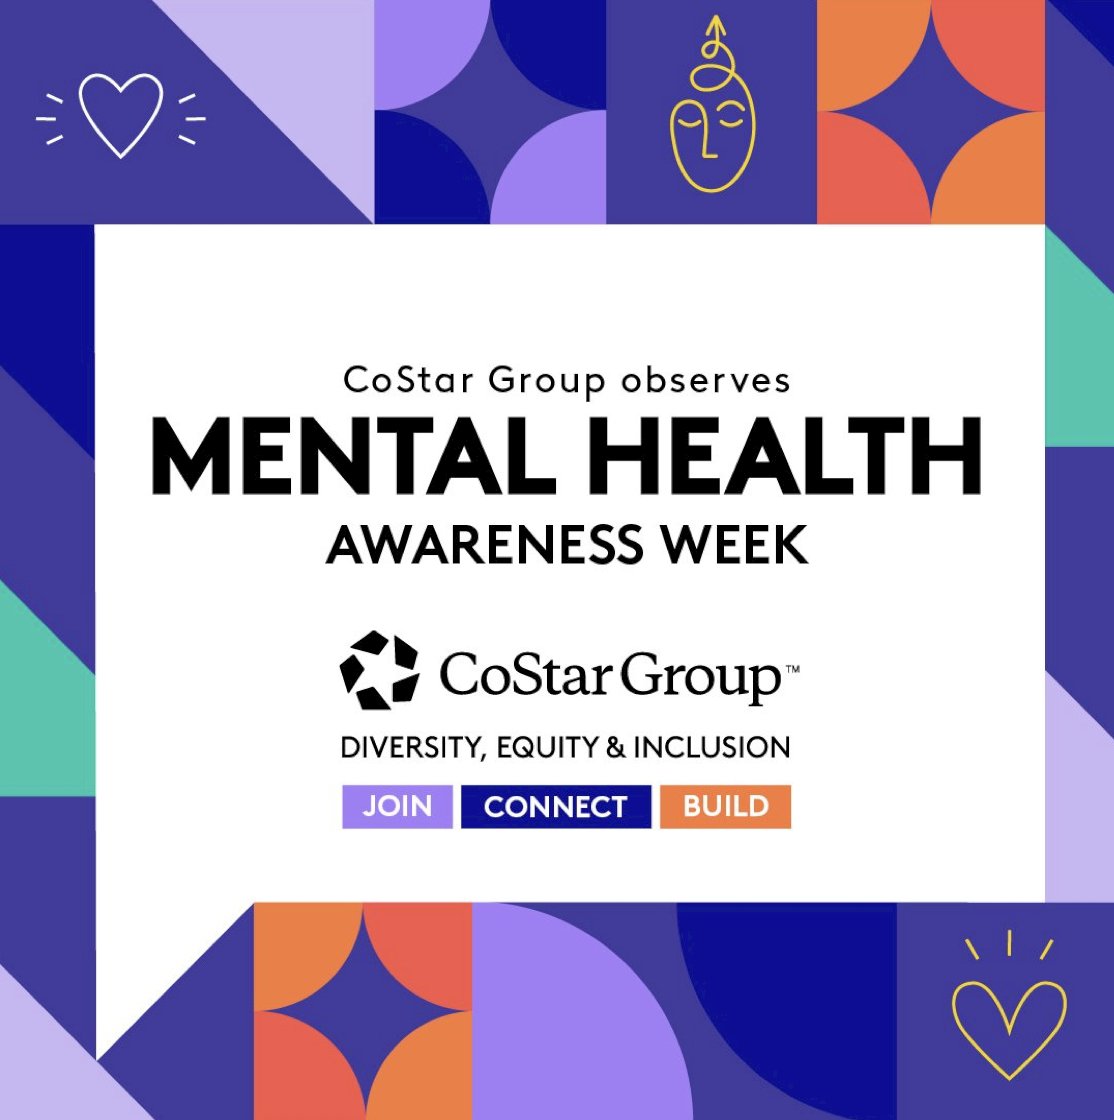 It's #MentalHealthAwarenessWeek in the UK! We are excited to celebrate this year's theme, 'Move your way,' with physical exercise and guest speakers for our team members. #LifeAtCoStar